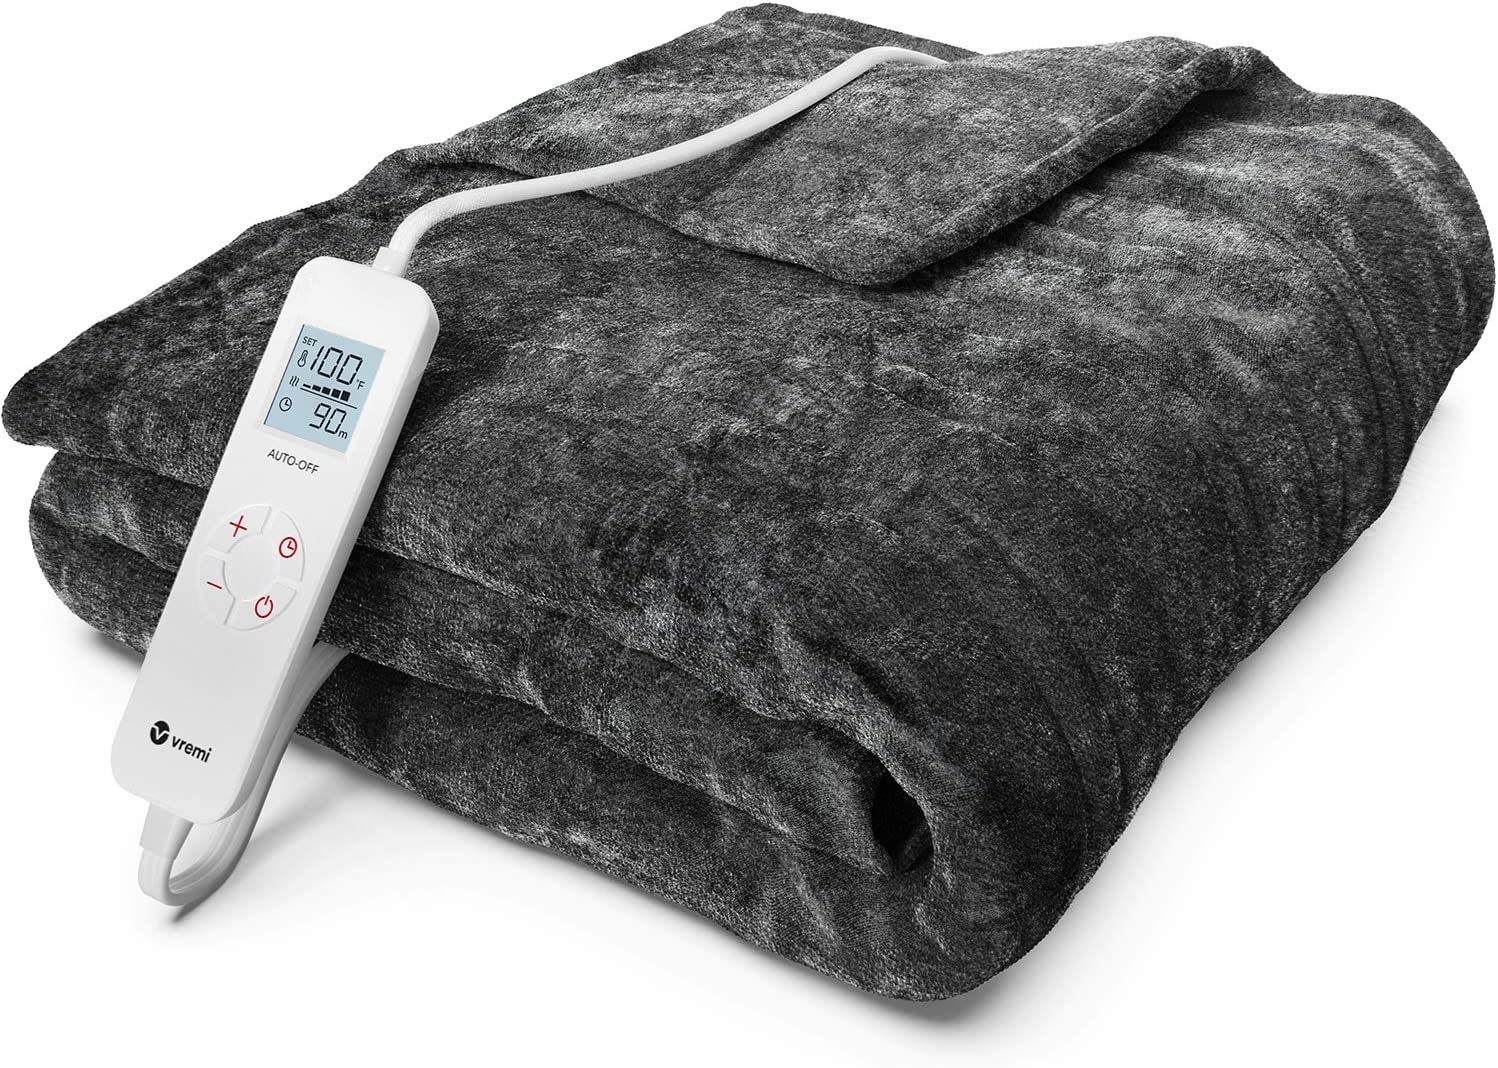 A gray heated blanket.